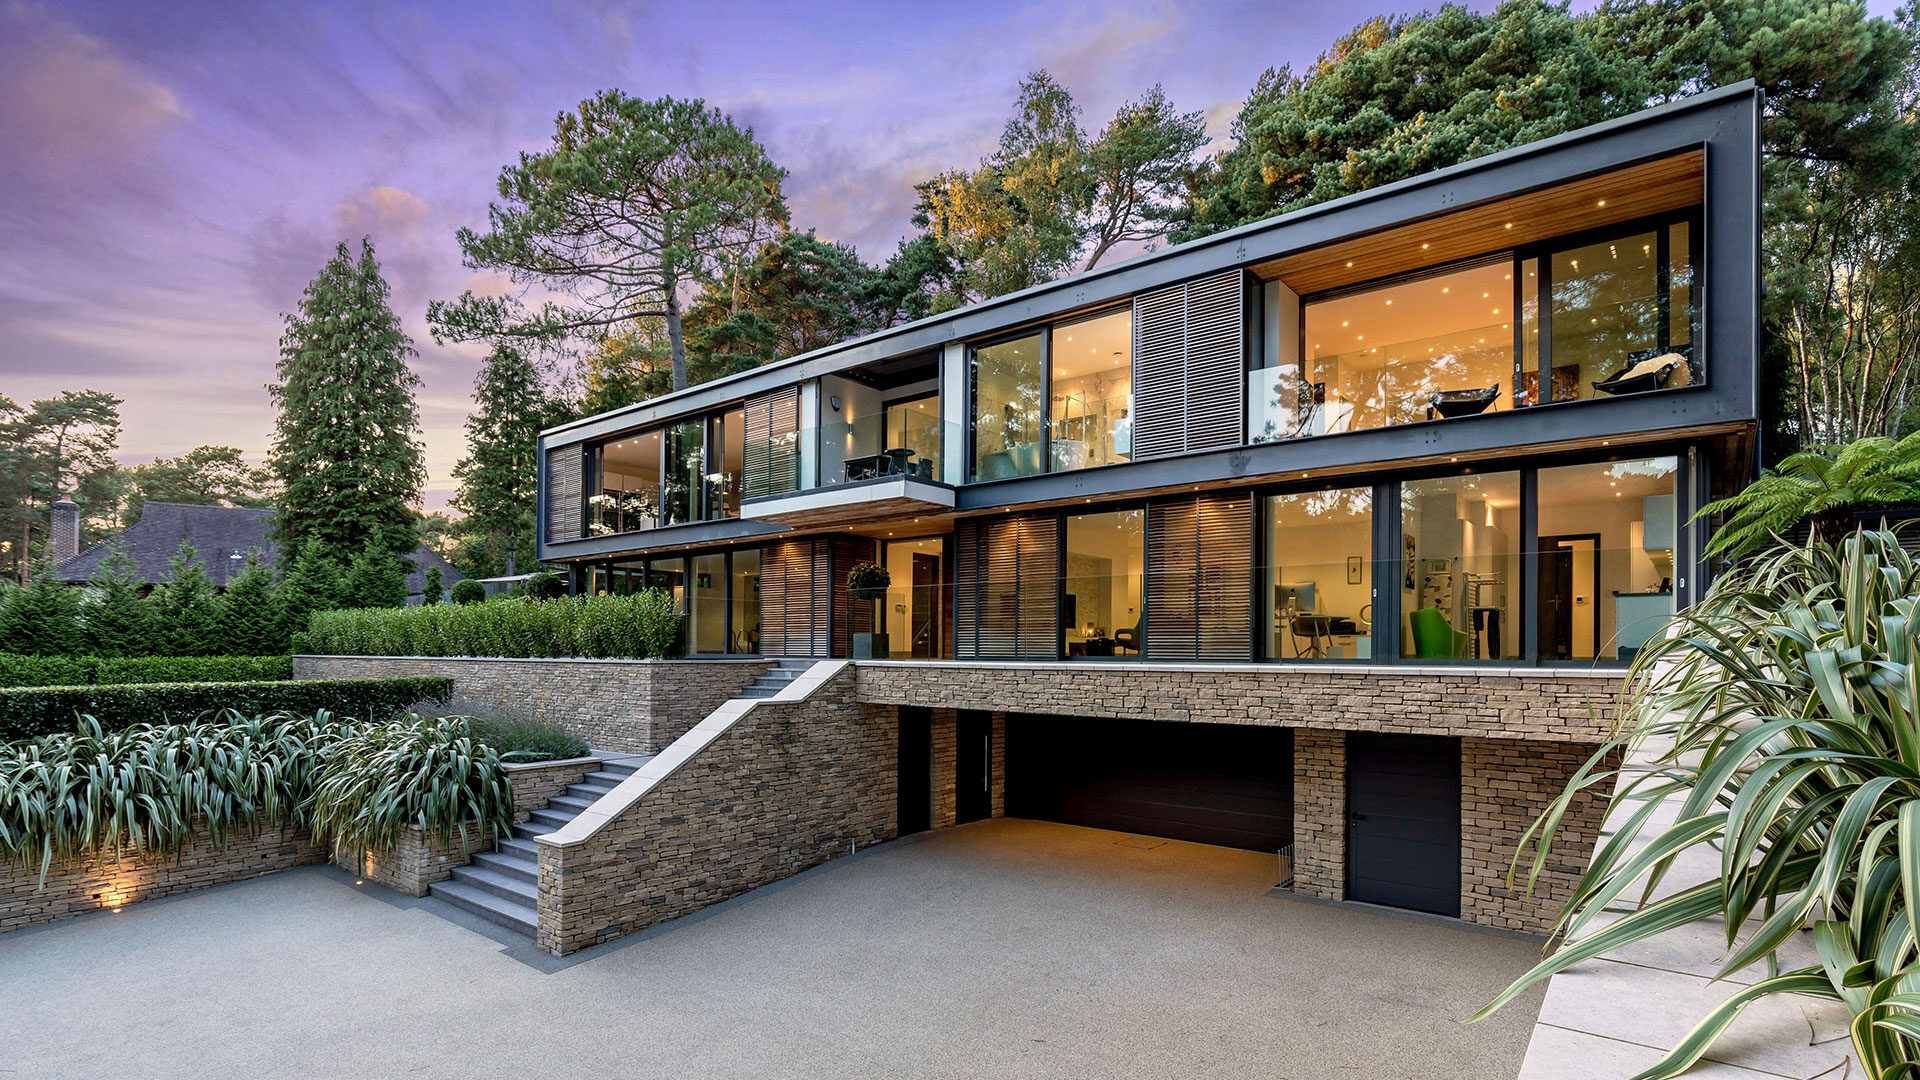 Contemporary house surrounded by trees at dusk